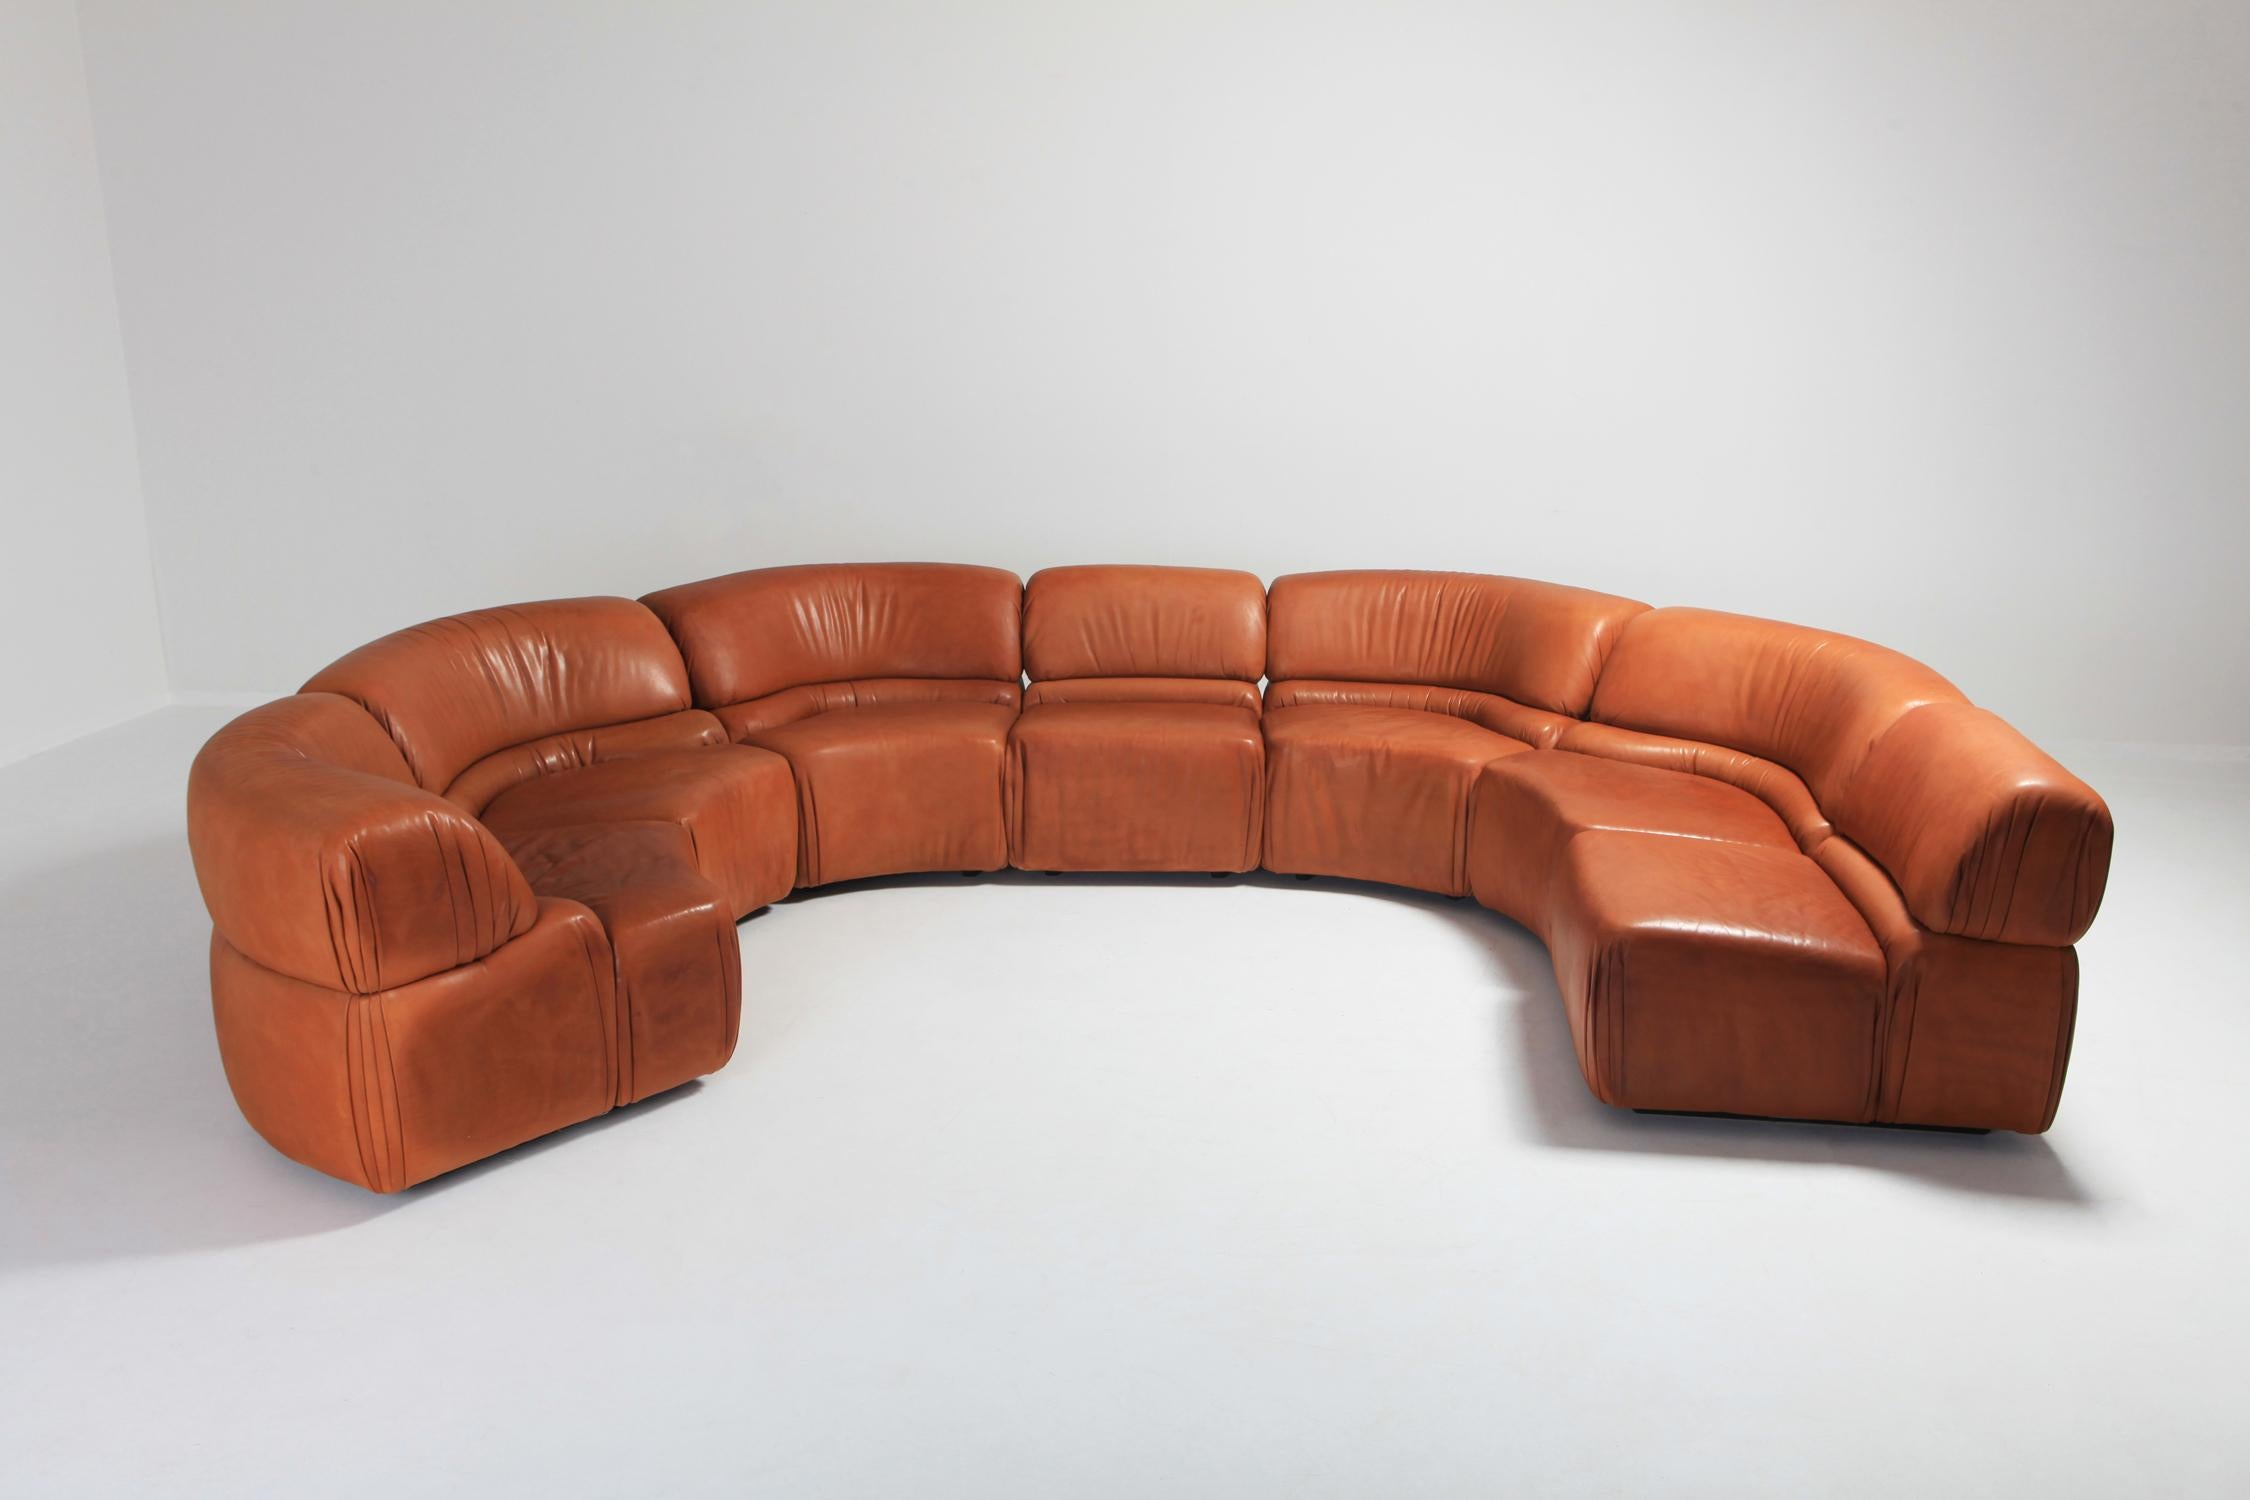 Mid-Century Modern 'Cosmos' Sectional Cognac Leather Sofa by De Sede, Switzerland